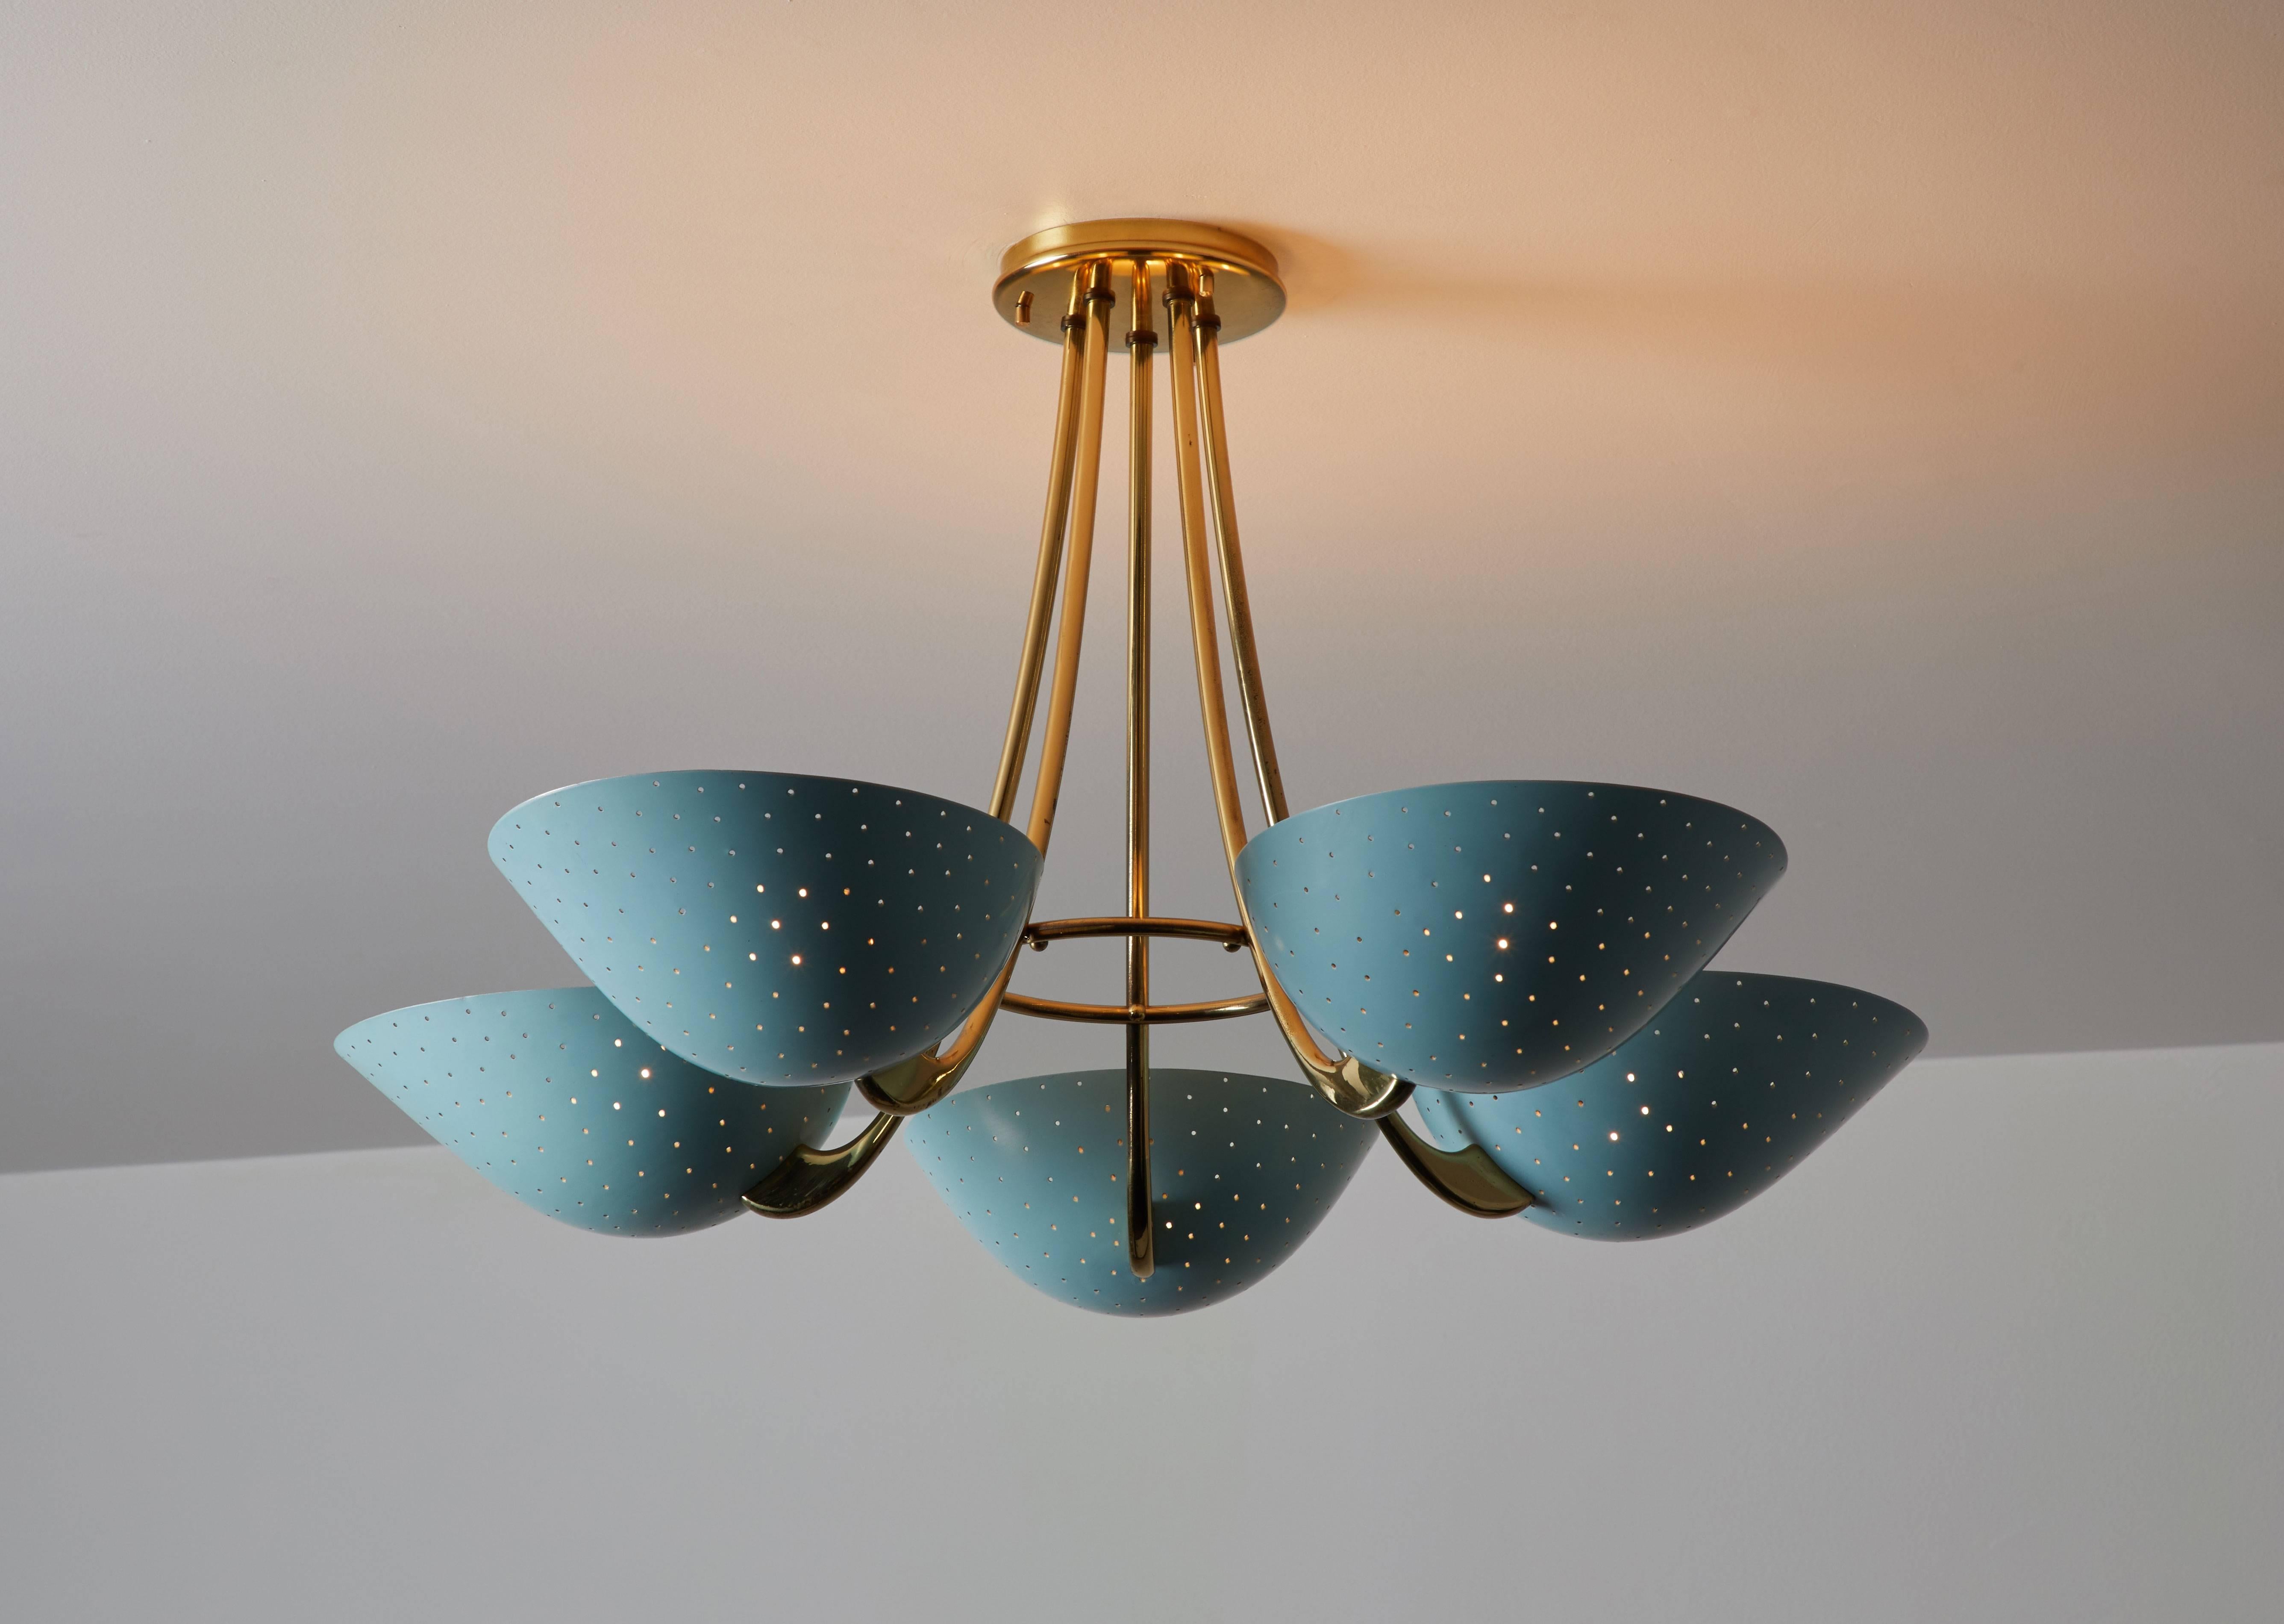 Rare five shade Swiss chandelier by Bag-Turgi, manufactured in Switzerland, circa 1950s. Original enameled metal and brass. Original paint color. Distinct perforations to each shade. Elegant brass armature mounted to each shade. Wired for US